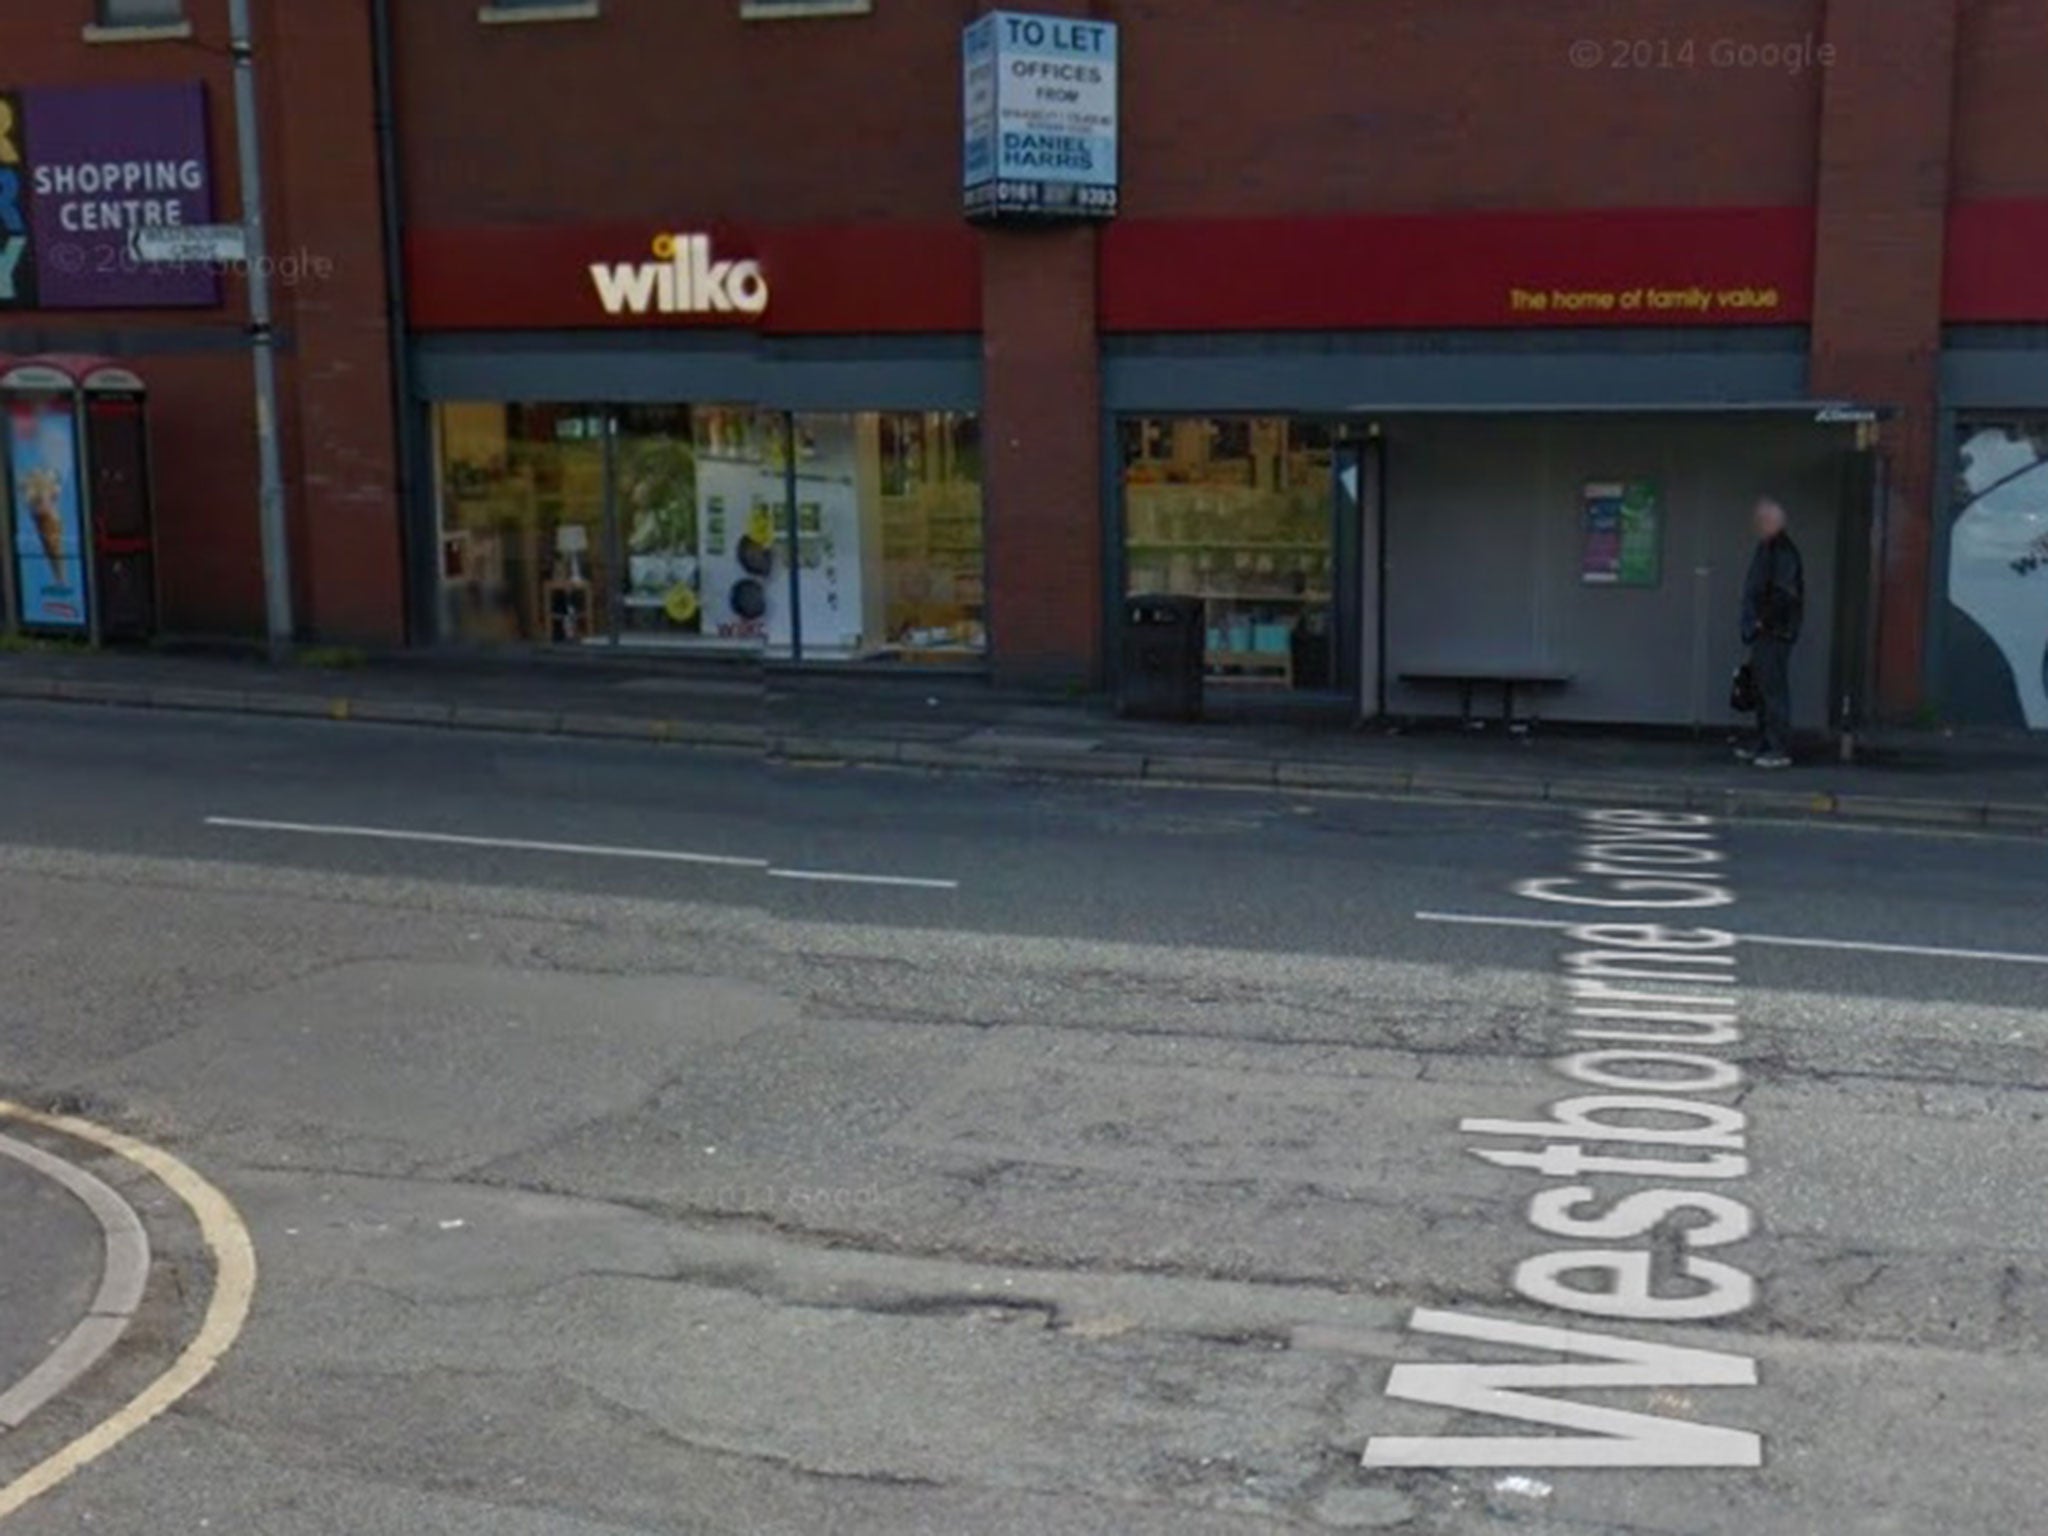 The attack took place inside the Wilko store in Harpurhey Shopping Centre, north Manchester